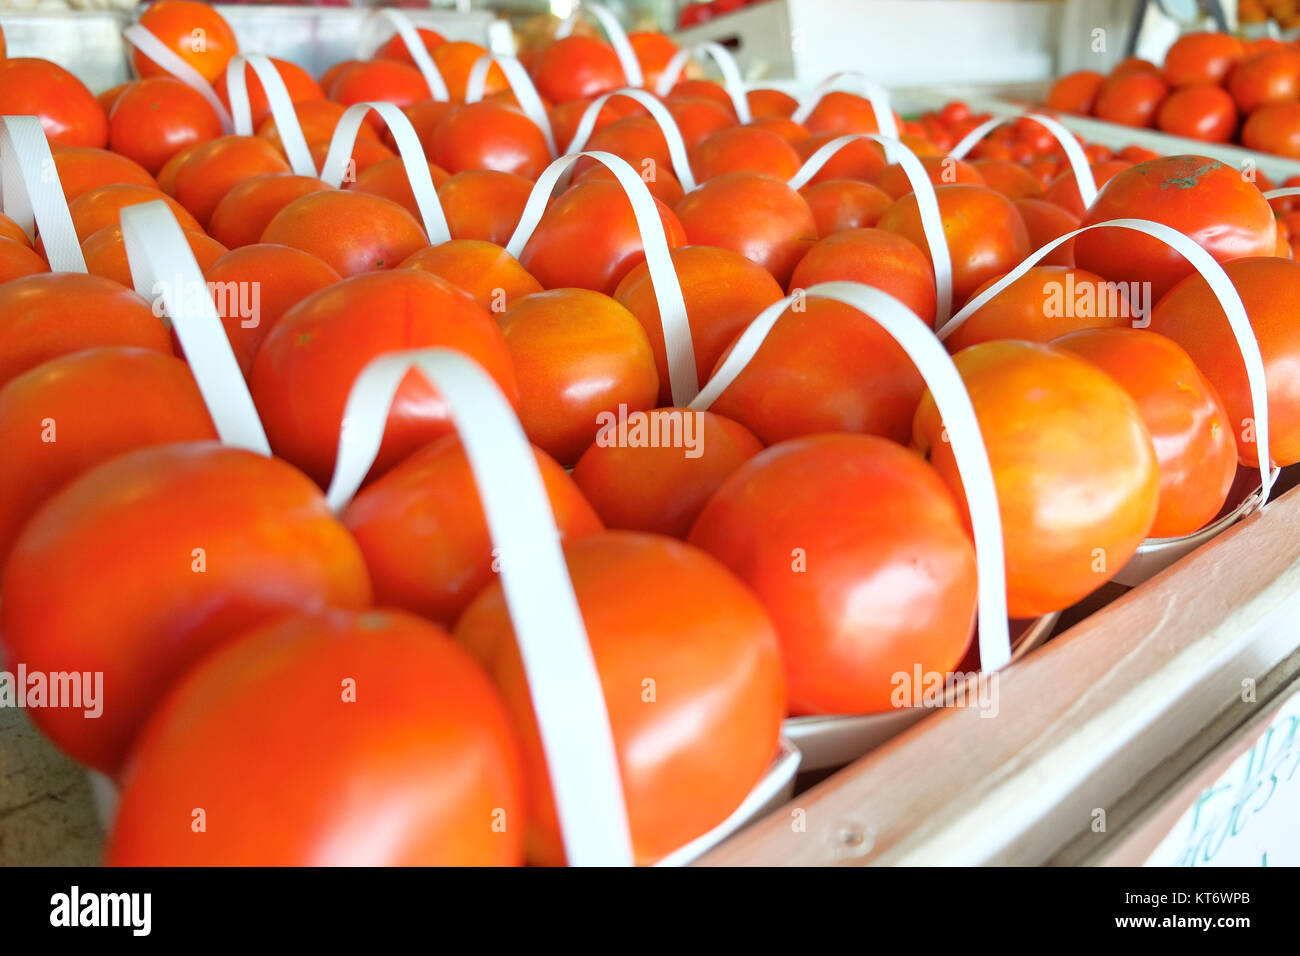 Close up of farm fresh beefsteak tomatoes in baskets at a farmer's market or produce market in rural Alabama, USA. Stock Photo